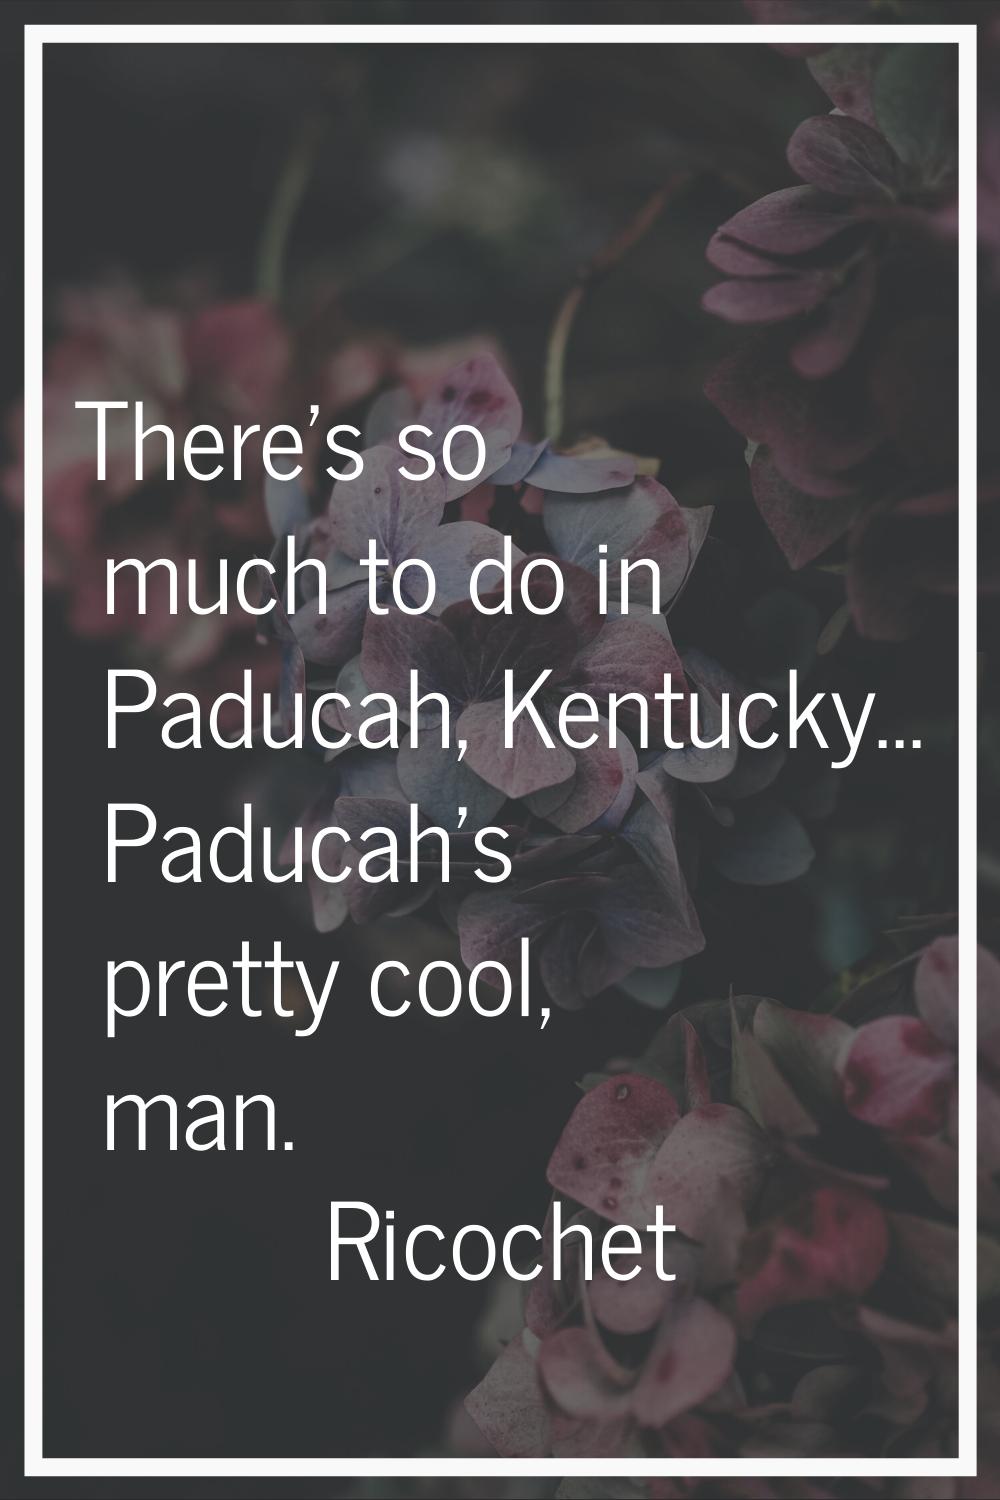 There's so much to do in Paducah, Kentucky... Paducah's pretty cool, man.